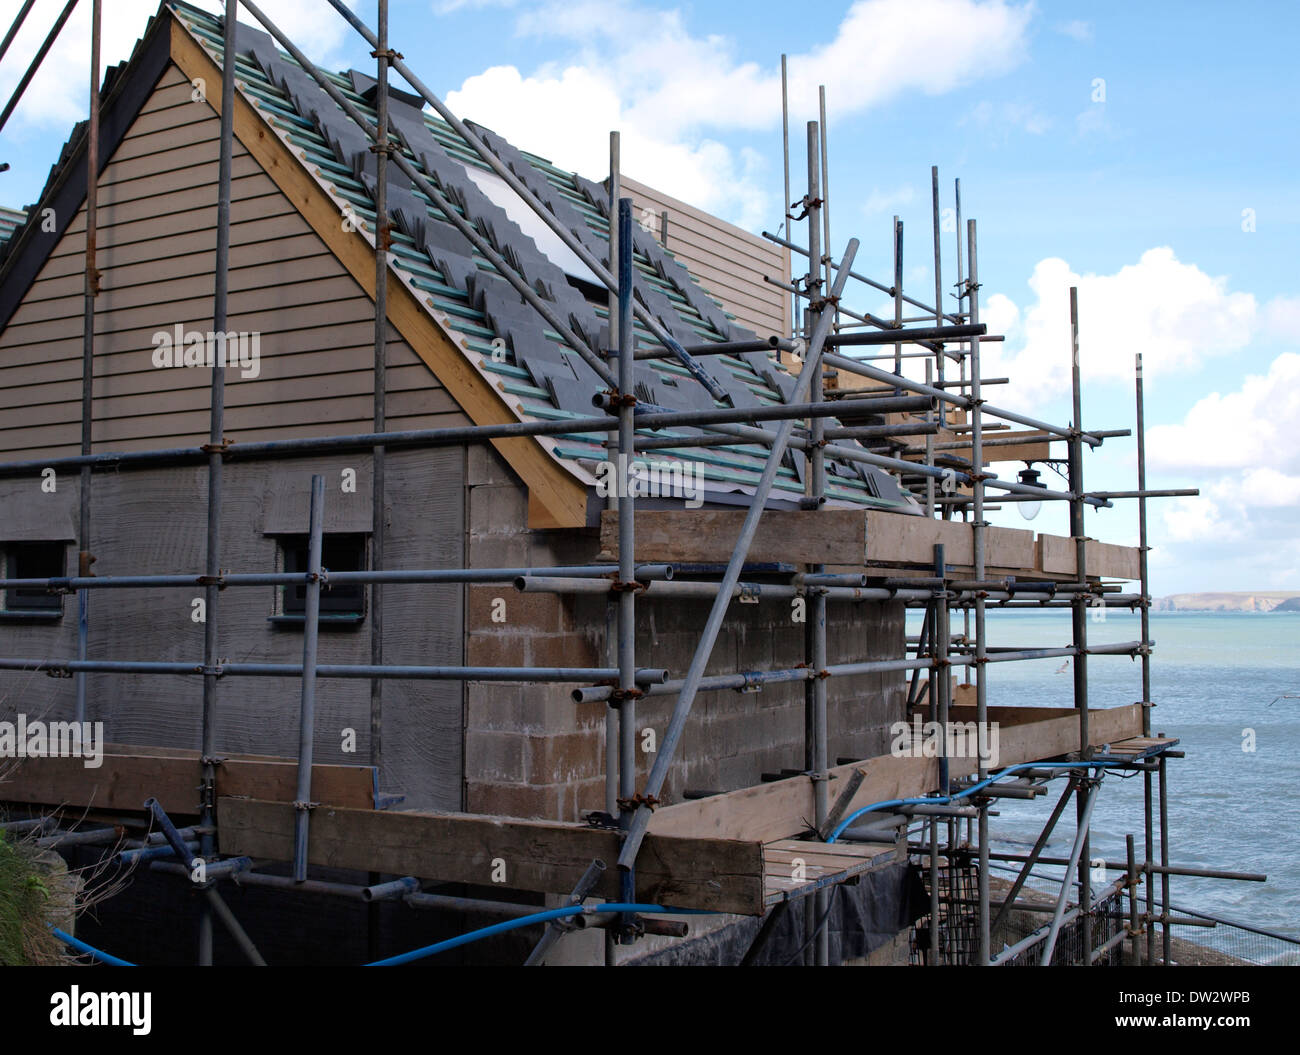 New fisherman's store rooms with offices above being built, Newquay Harbour, Cornwall, UK Stock Photo